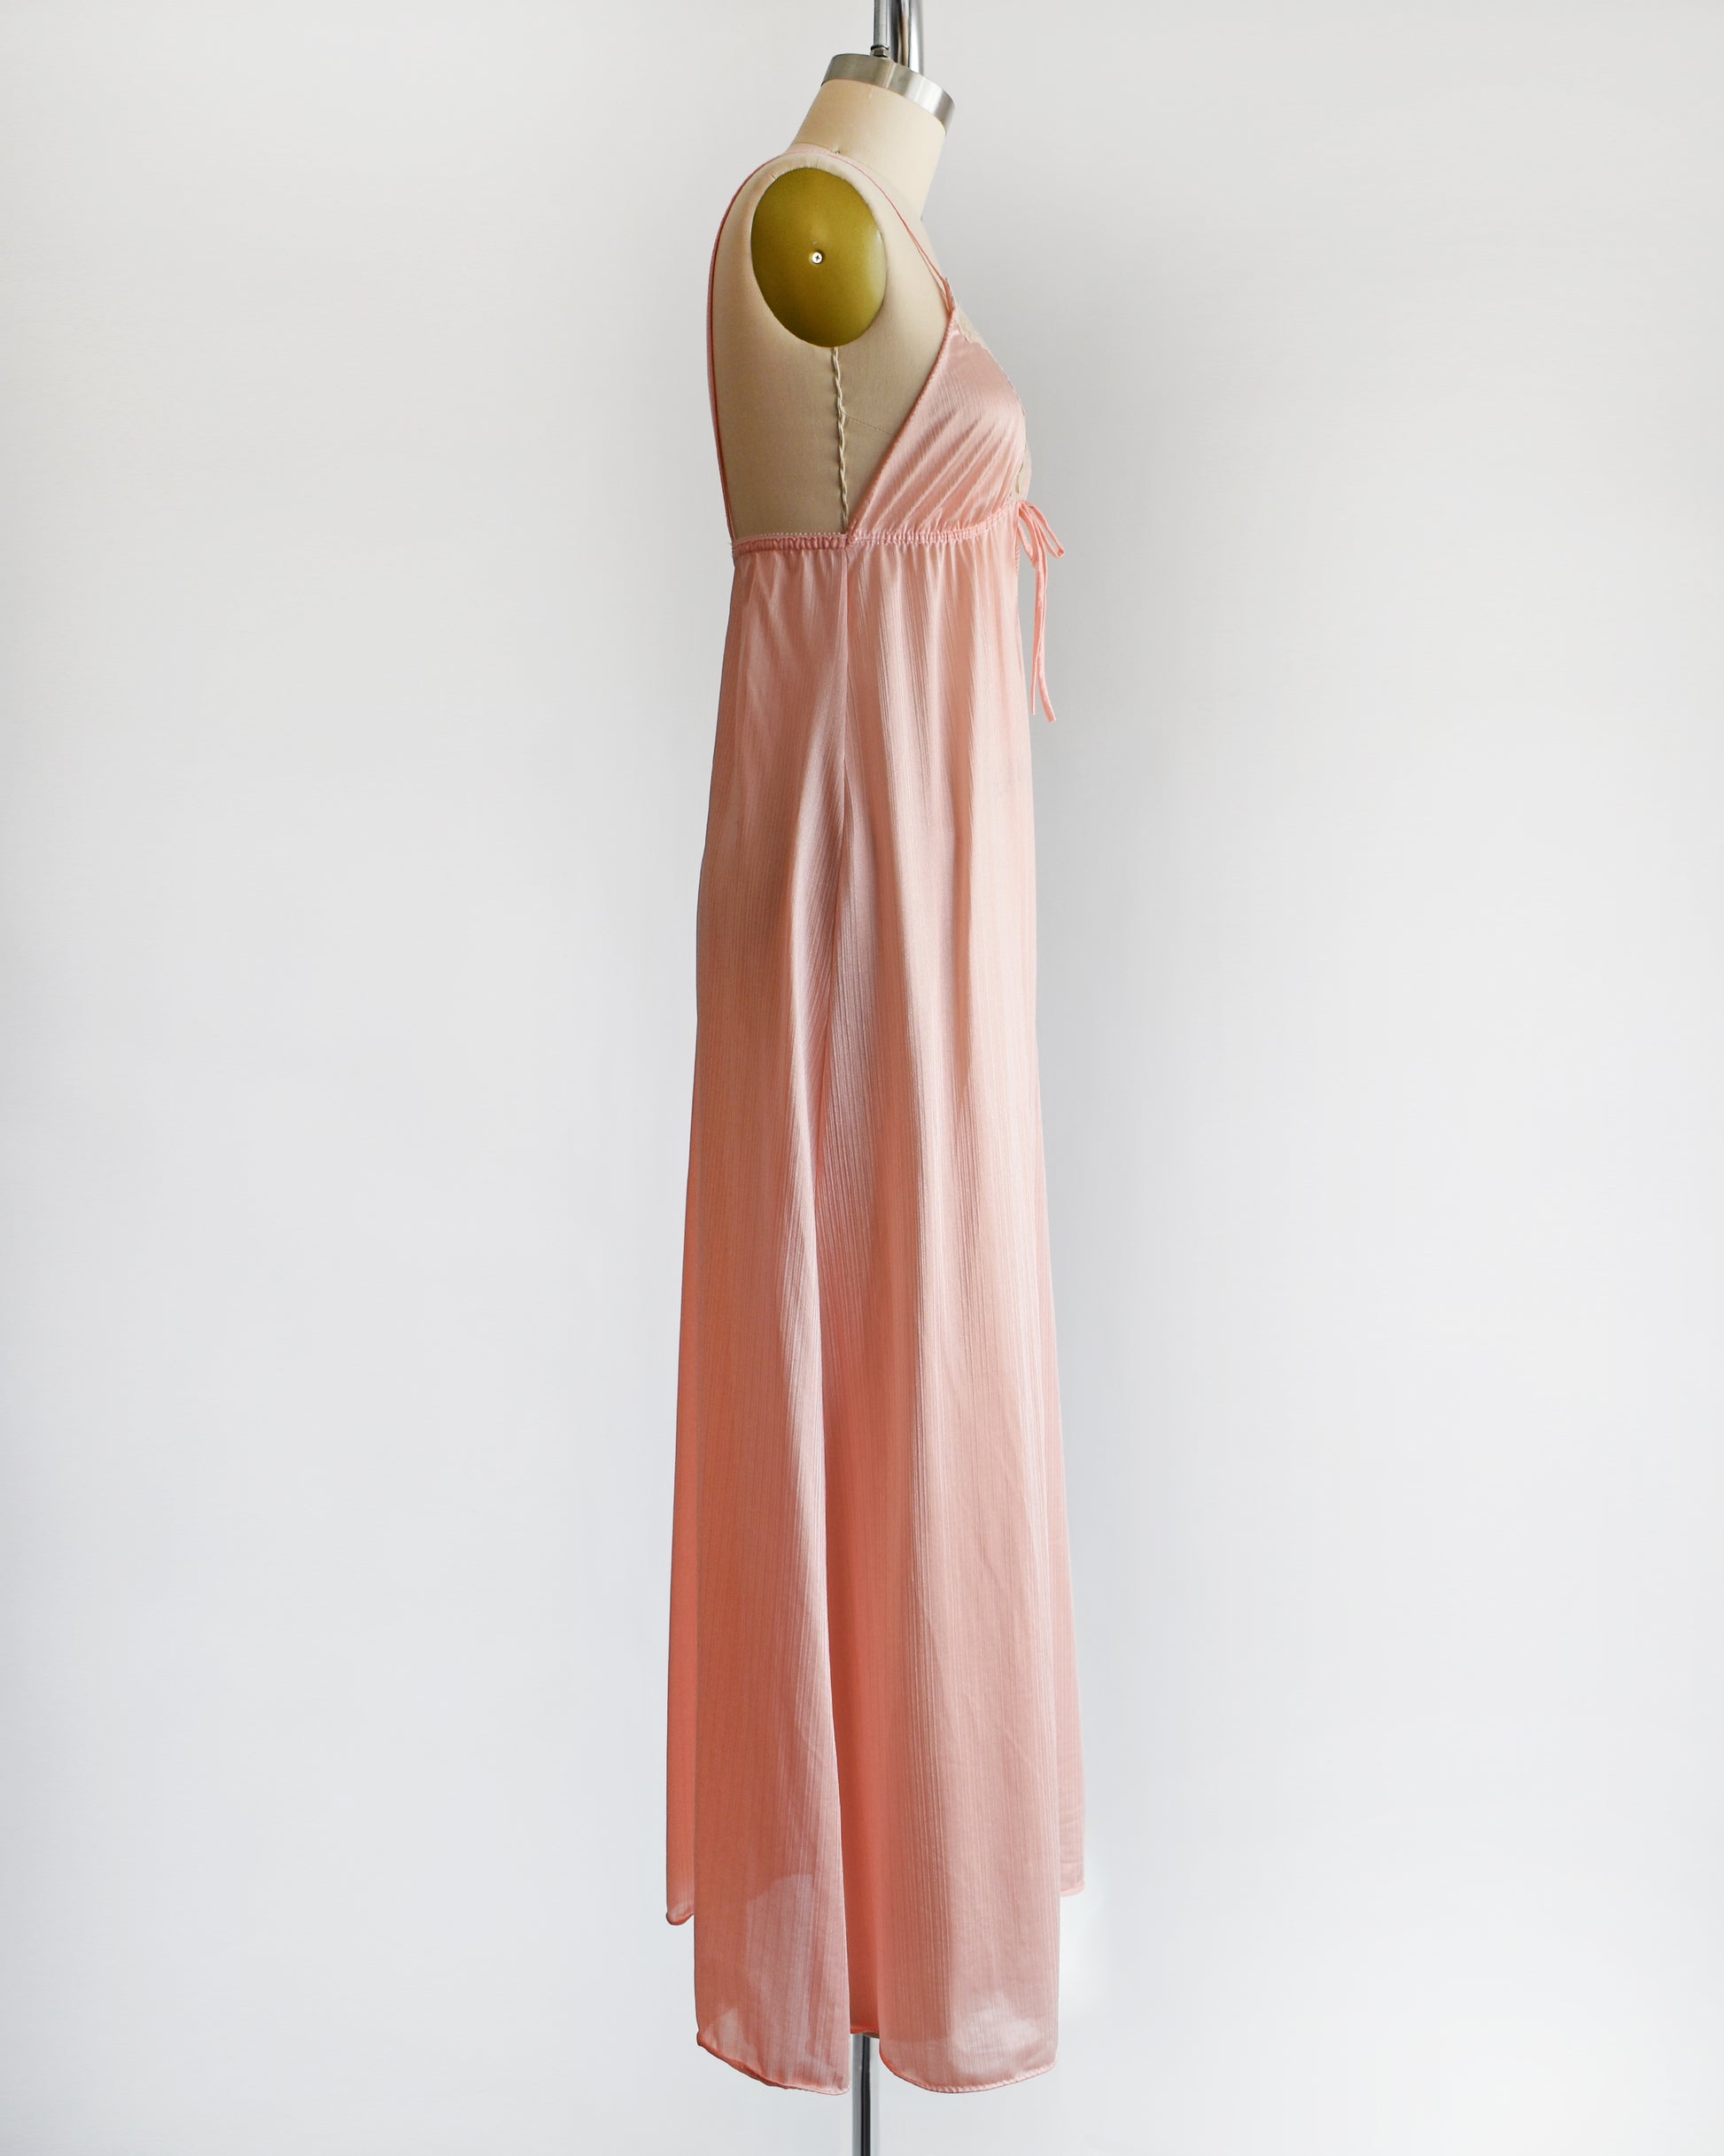 Side view of a A vintage 1970s peachy pink nightgown 